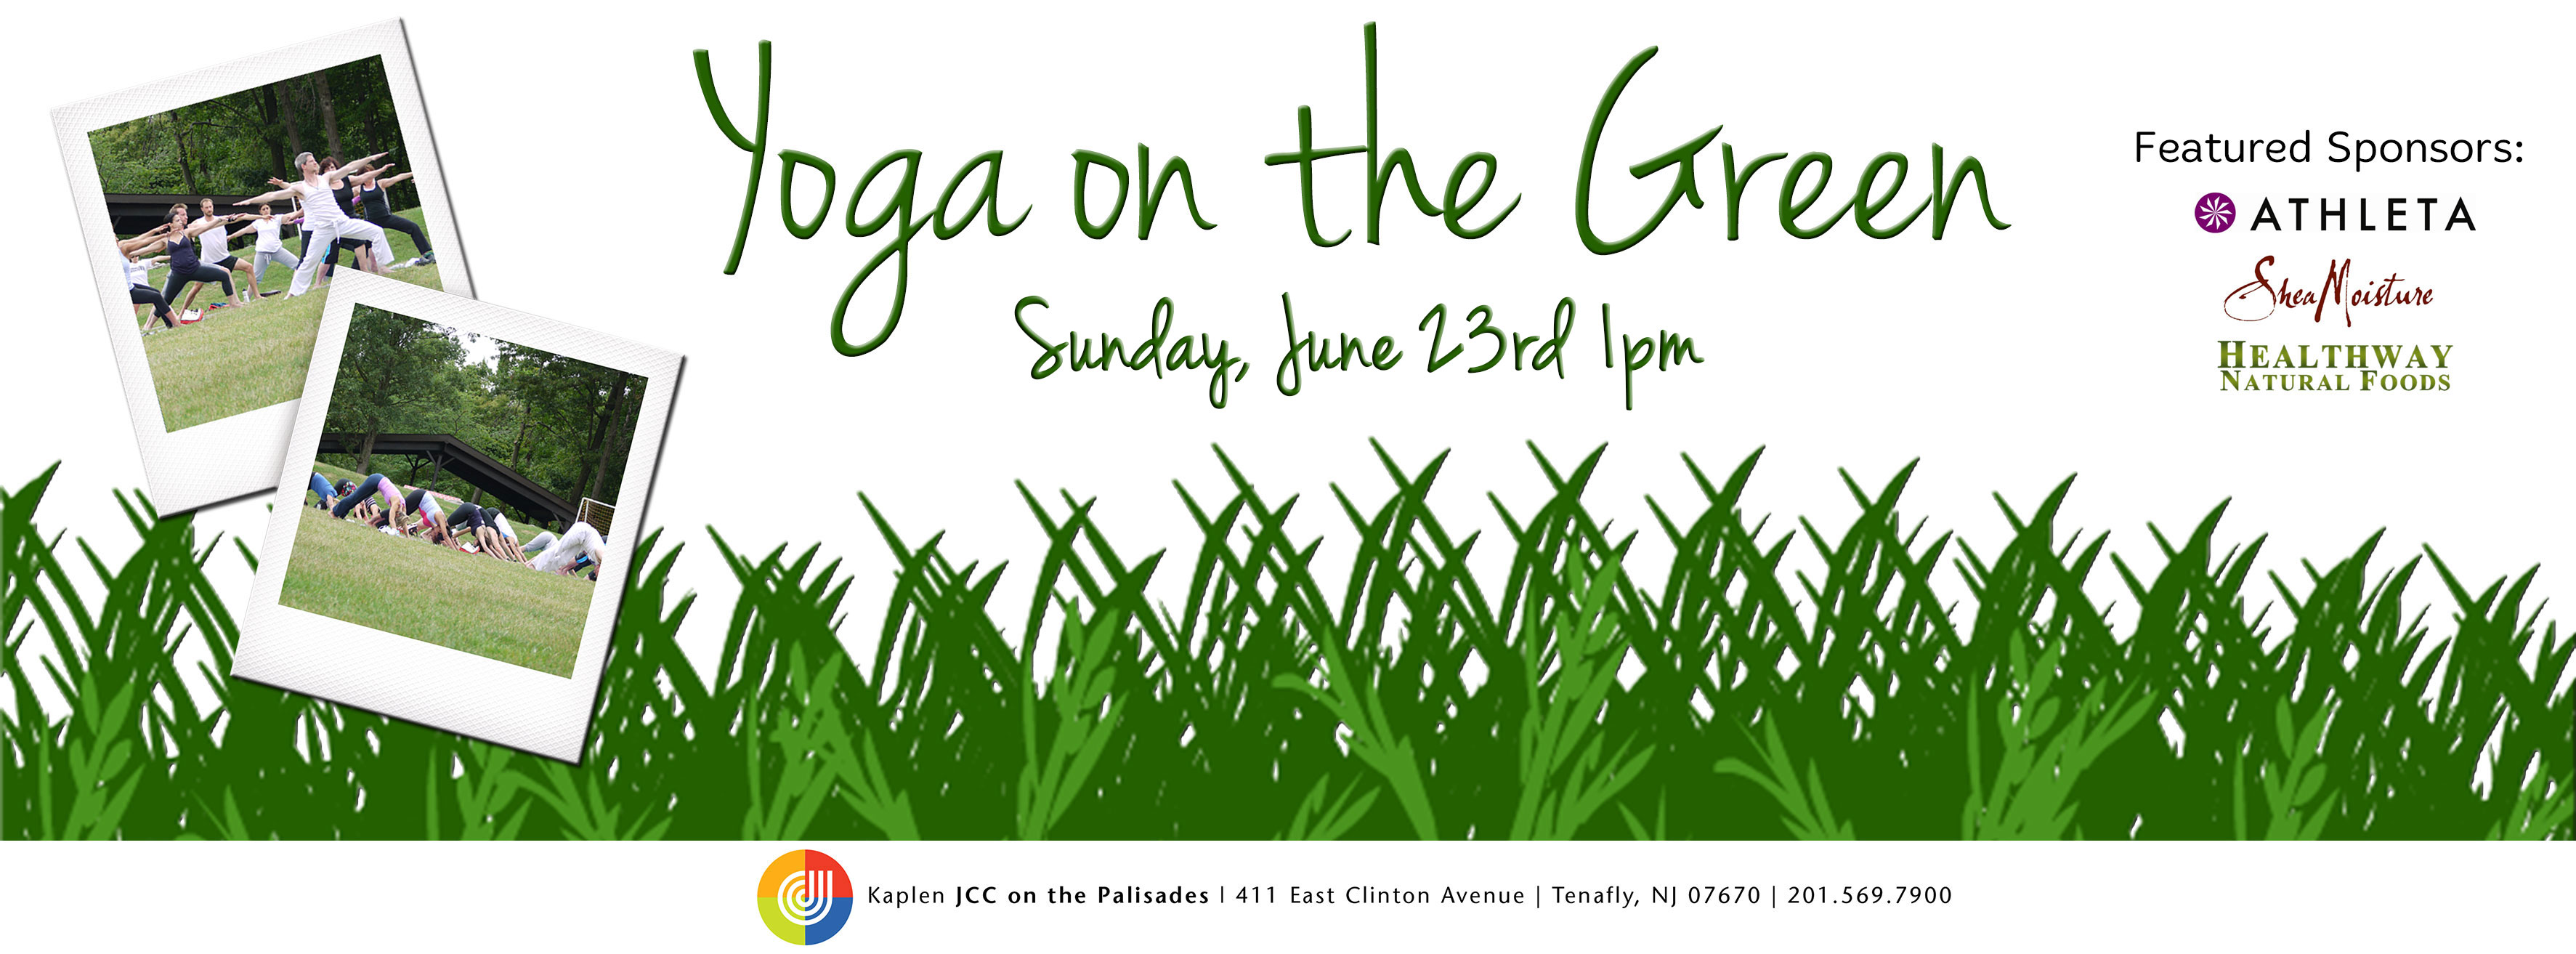 2nd Annual Yoga on the Green: June 23rd at 1pm